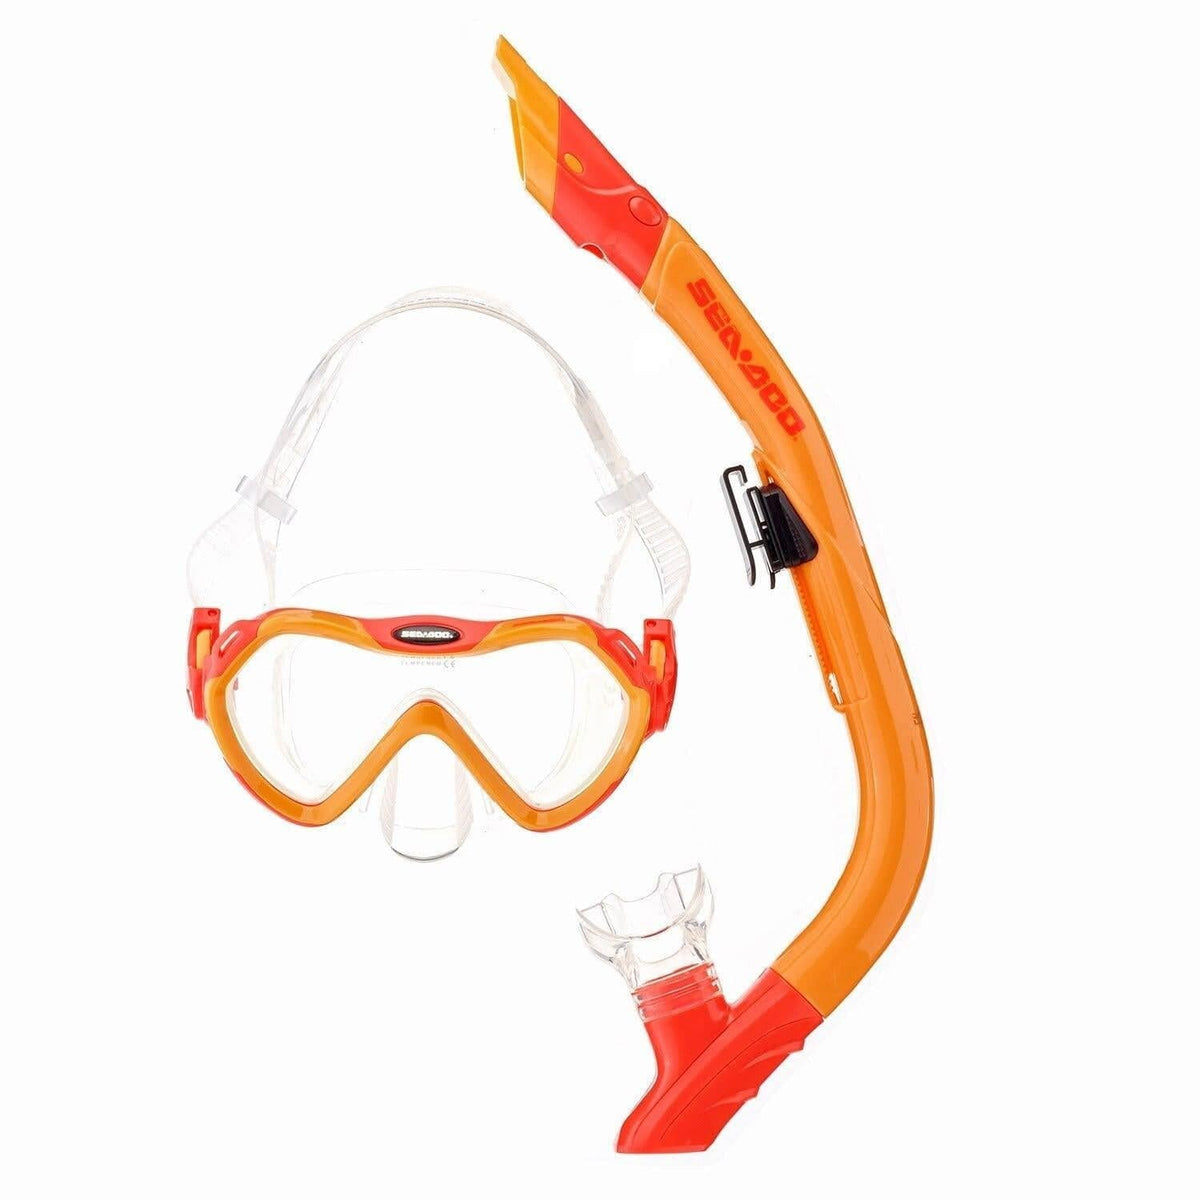 Youth Snorkeling Set - Factory Recreation